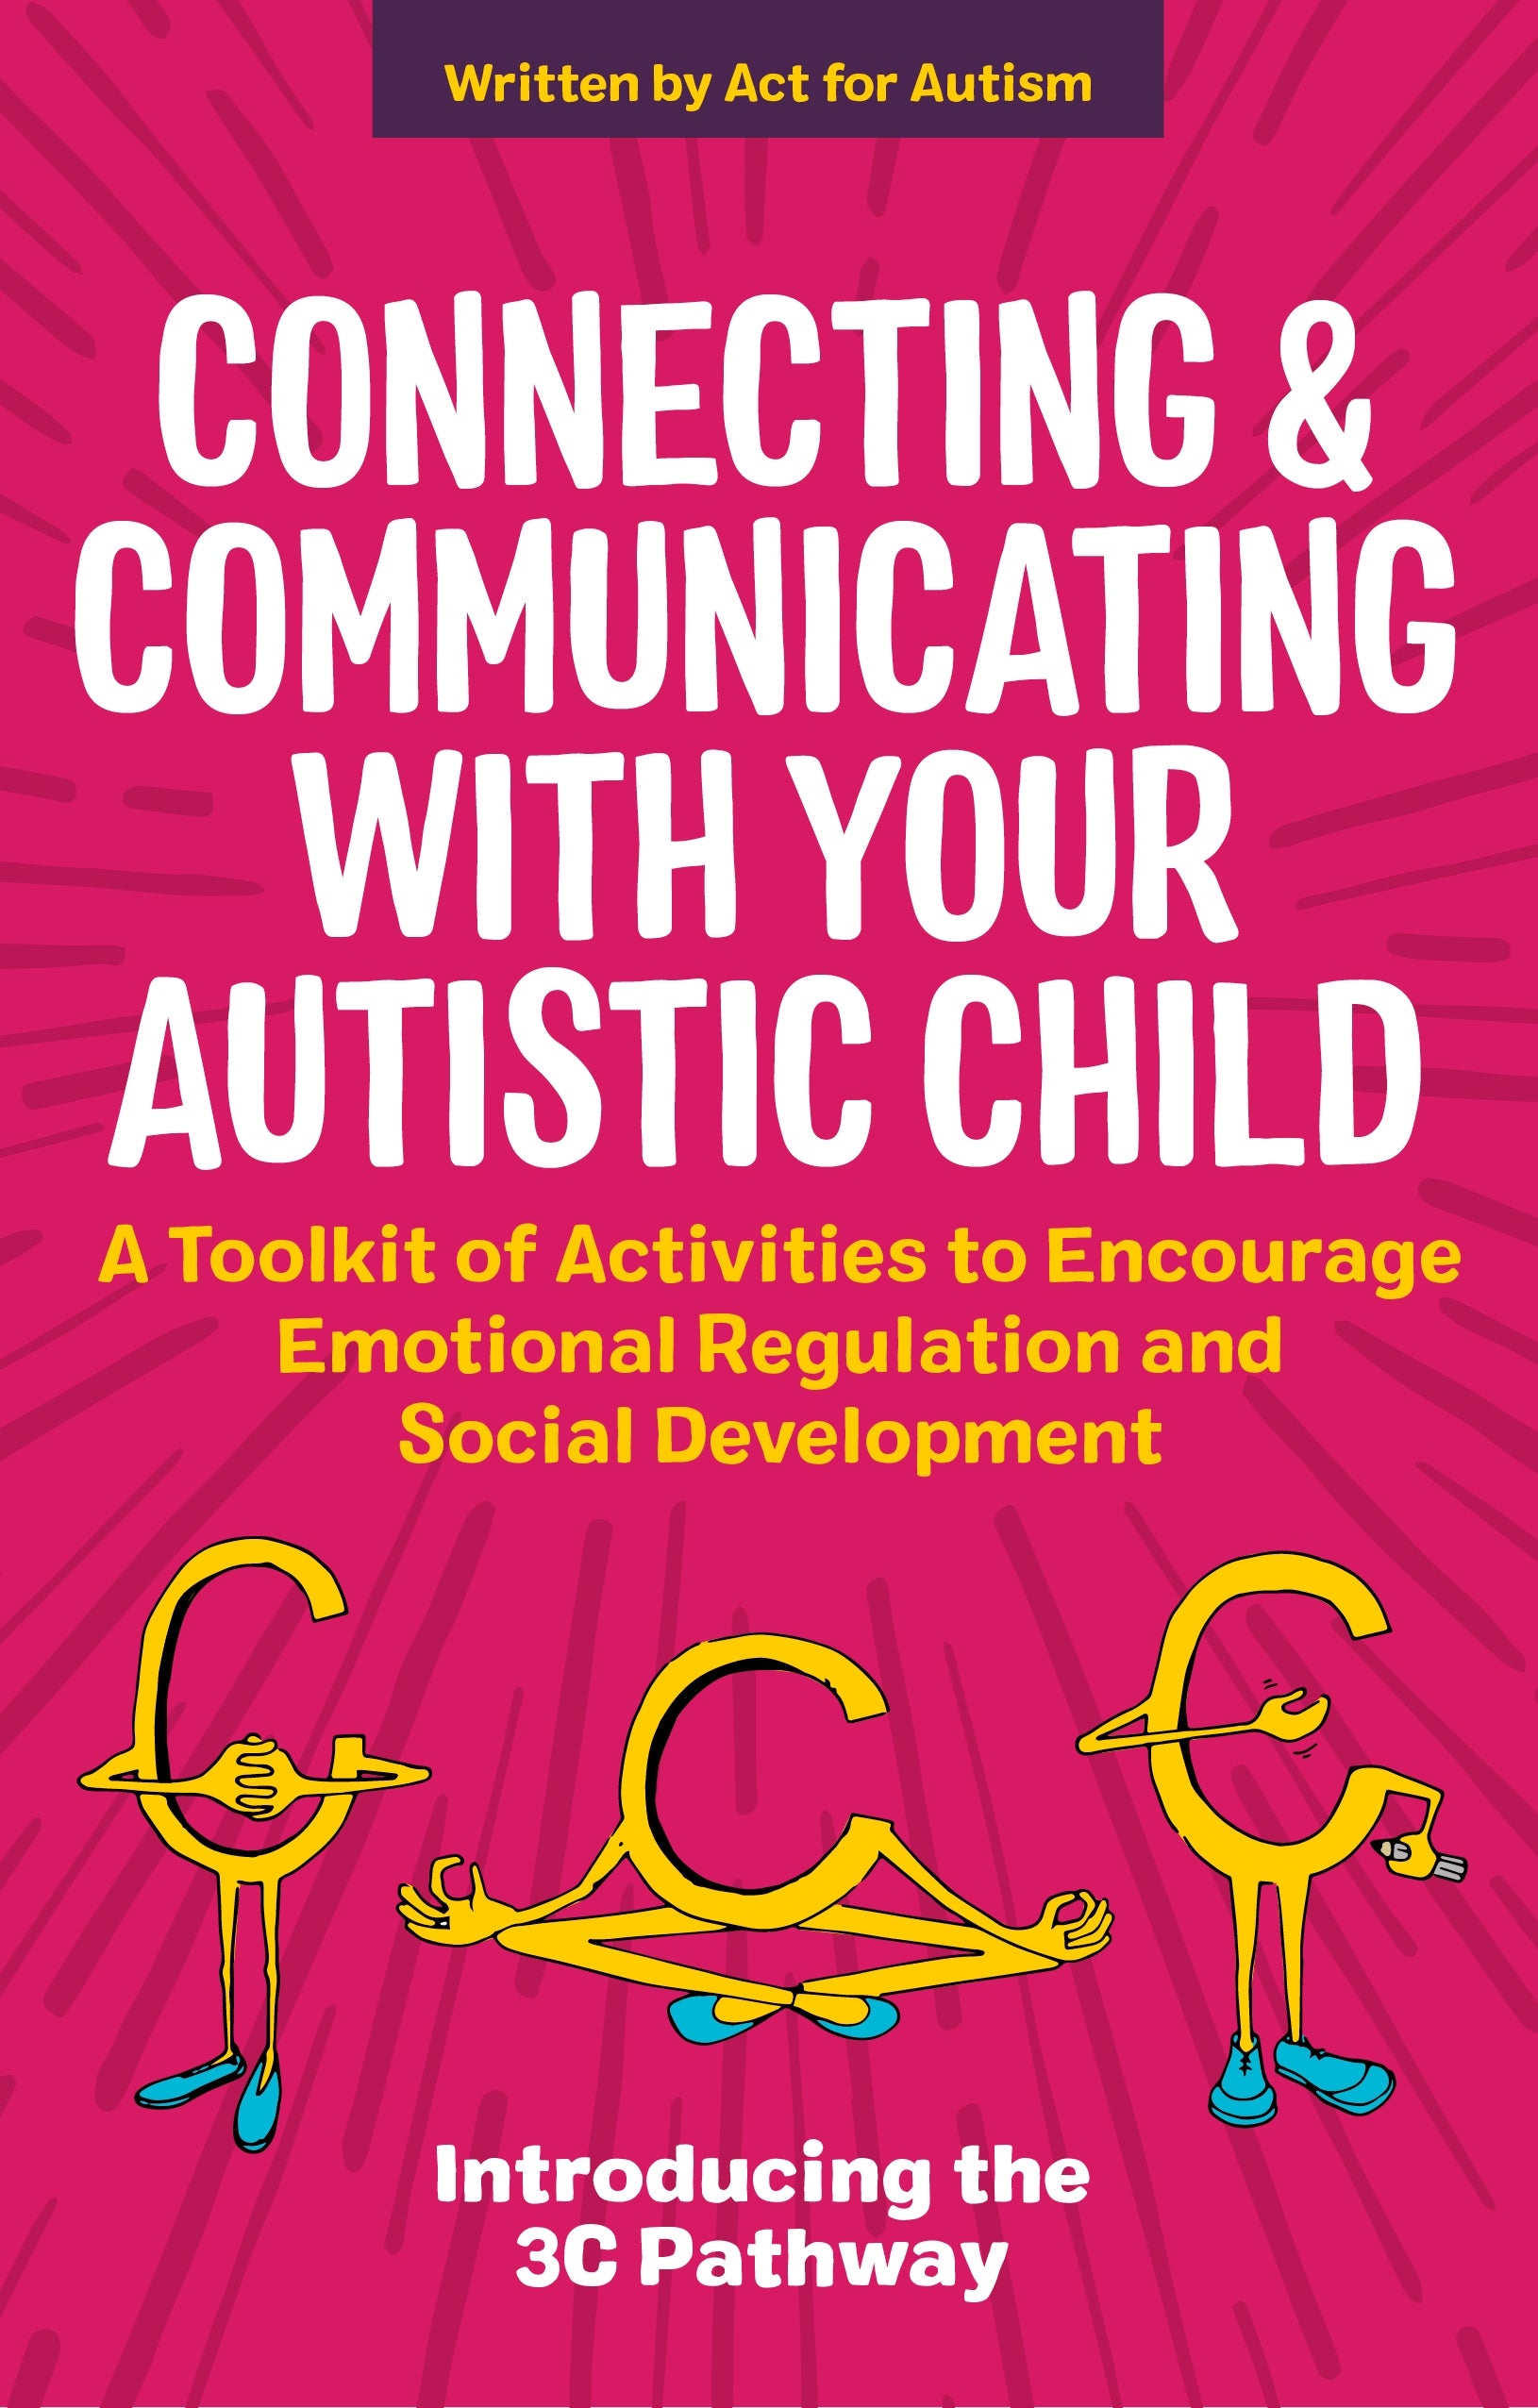 Connecting and Communicating with Your Autistic Child by Tessa Morton, Jane Gurnett, Glenys Jones